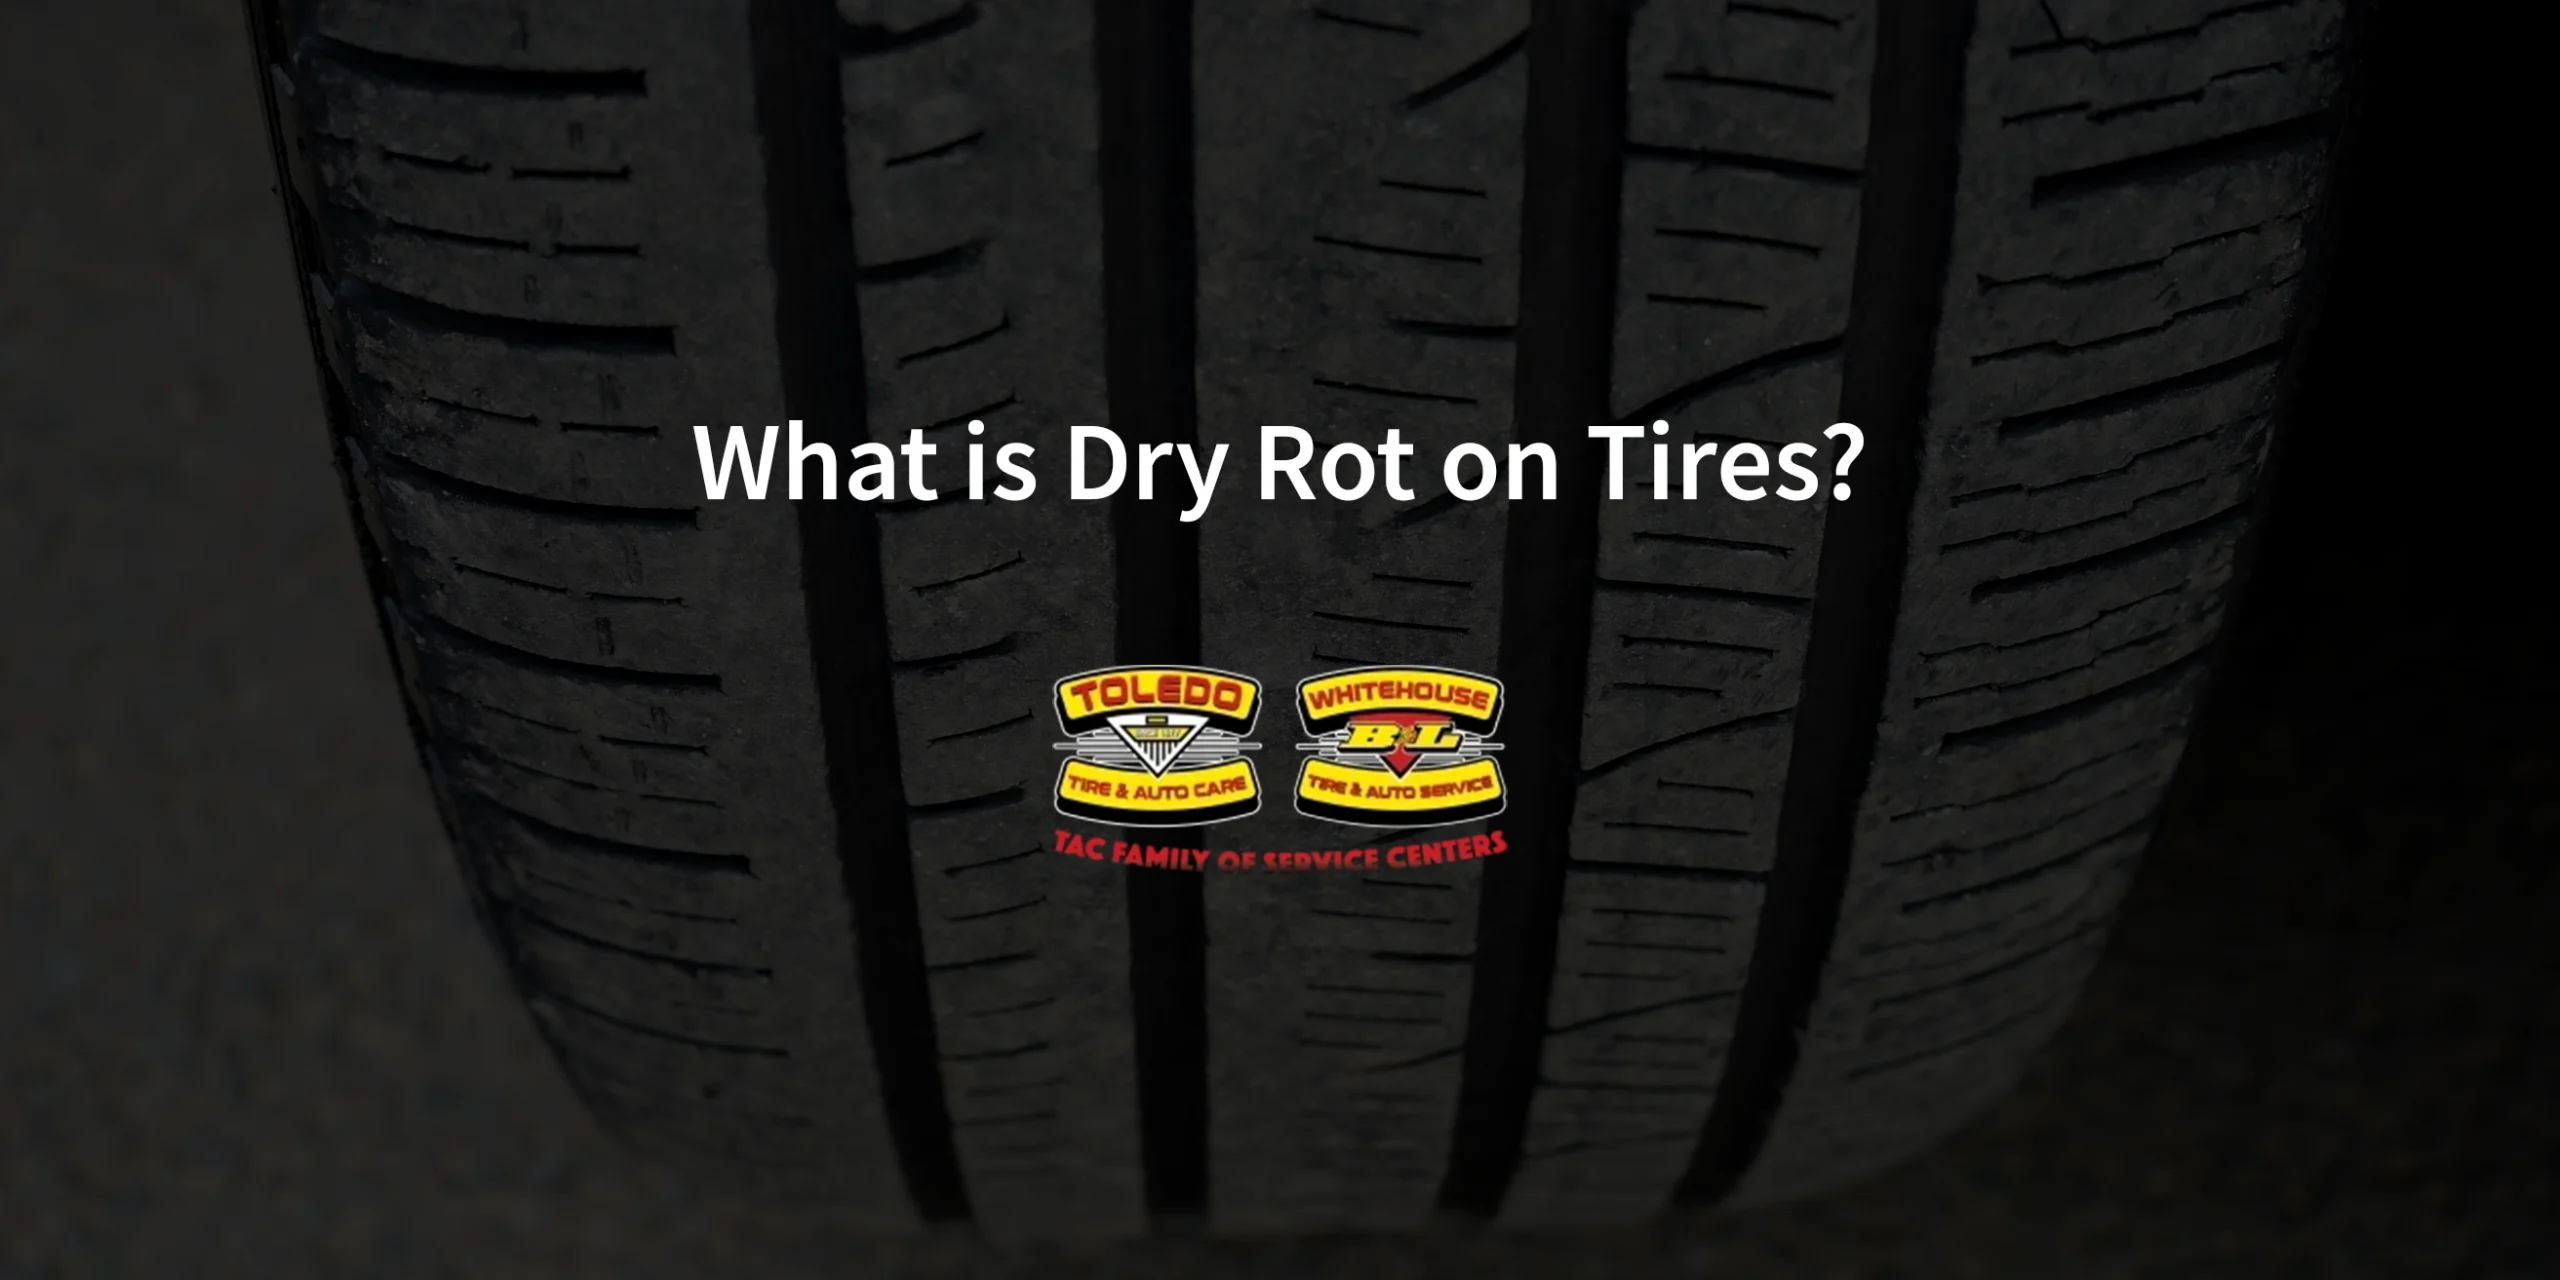 What is Dry Rot on Tires?